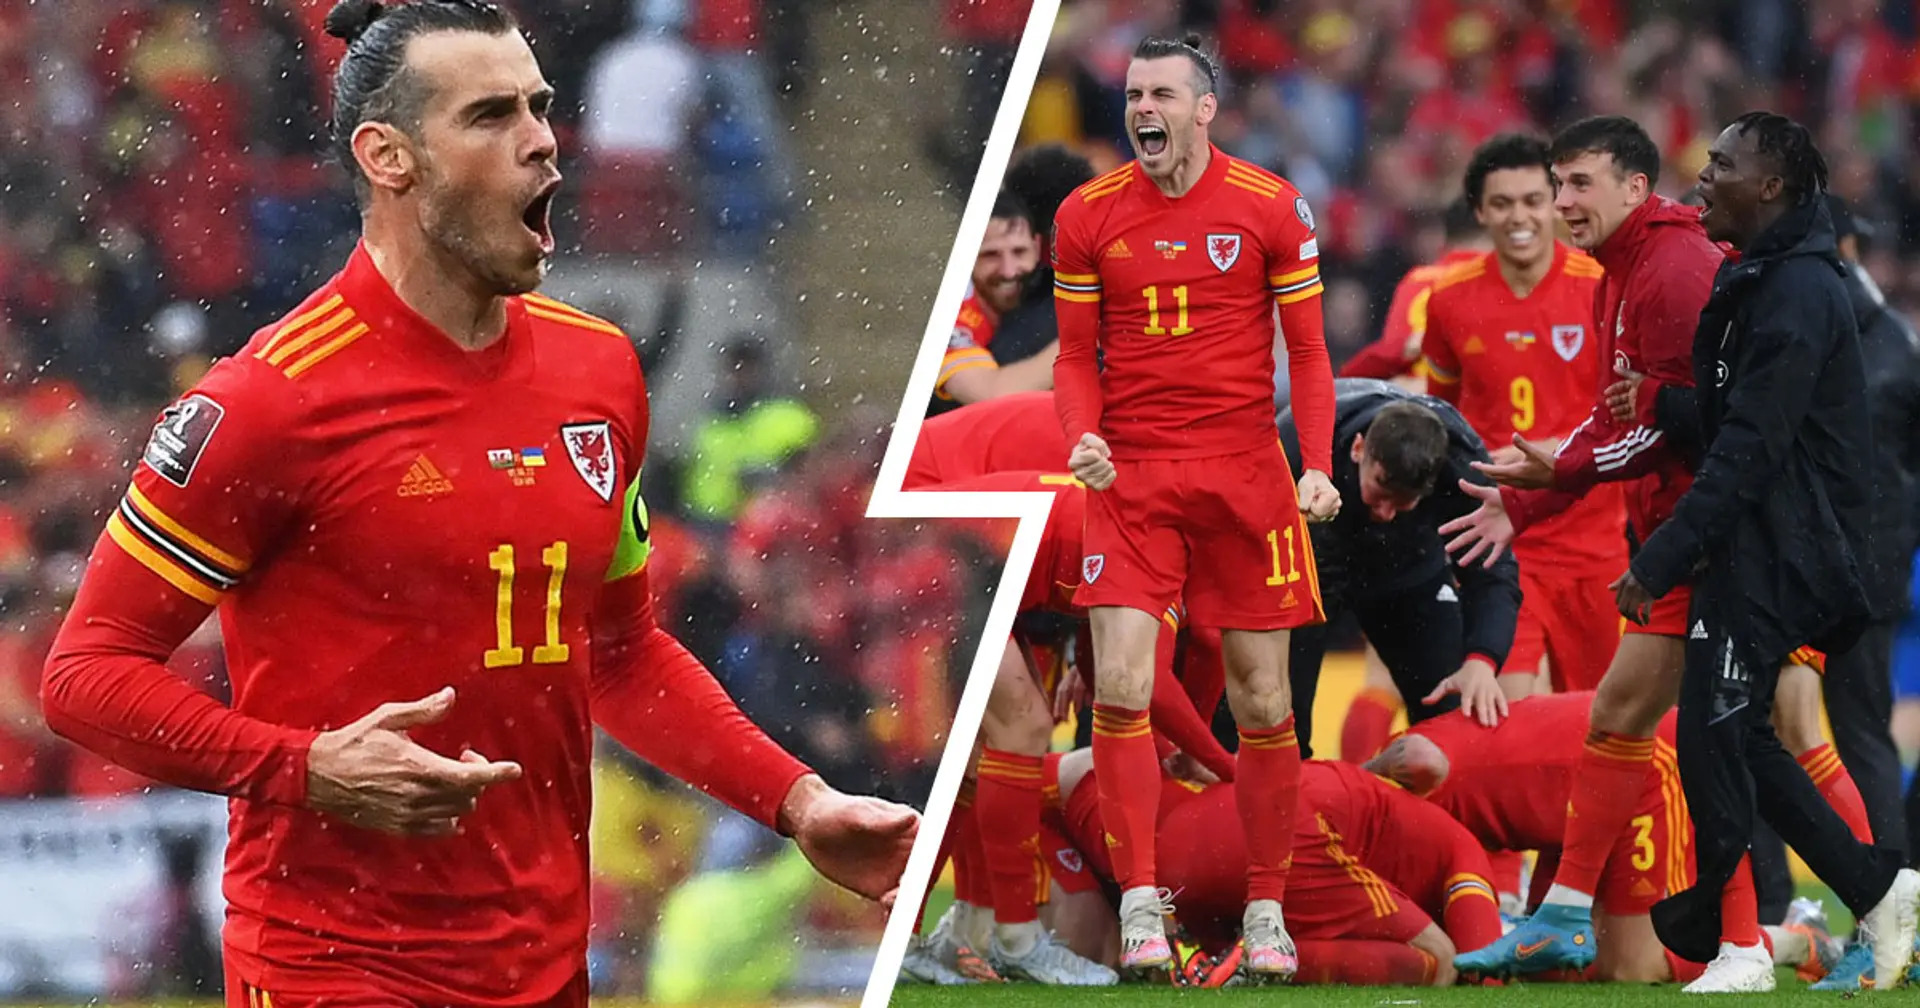 OFFICIAL: Wales qualify for FIFA World Cup for first time since 1958 after Ukraine win